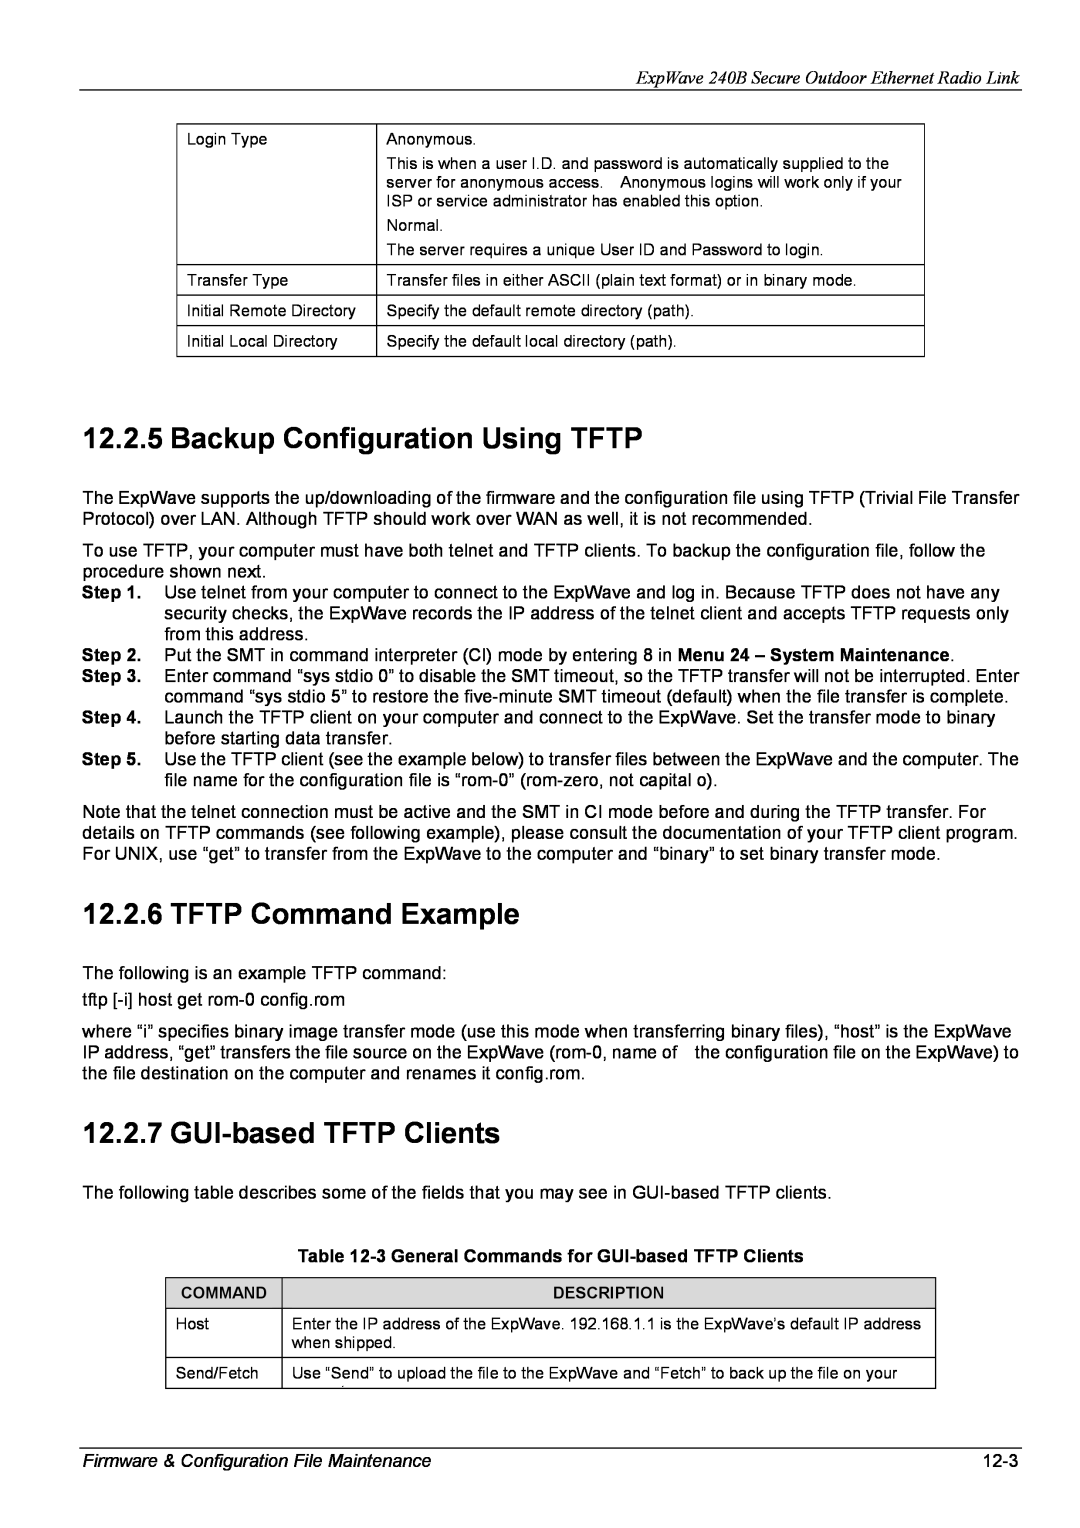 ZyXEL Communications 240B manual Backup Configuration Using TFTP, TFTP Command Example, GUI-based TFTP Clients, 12-3 